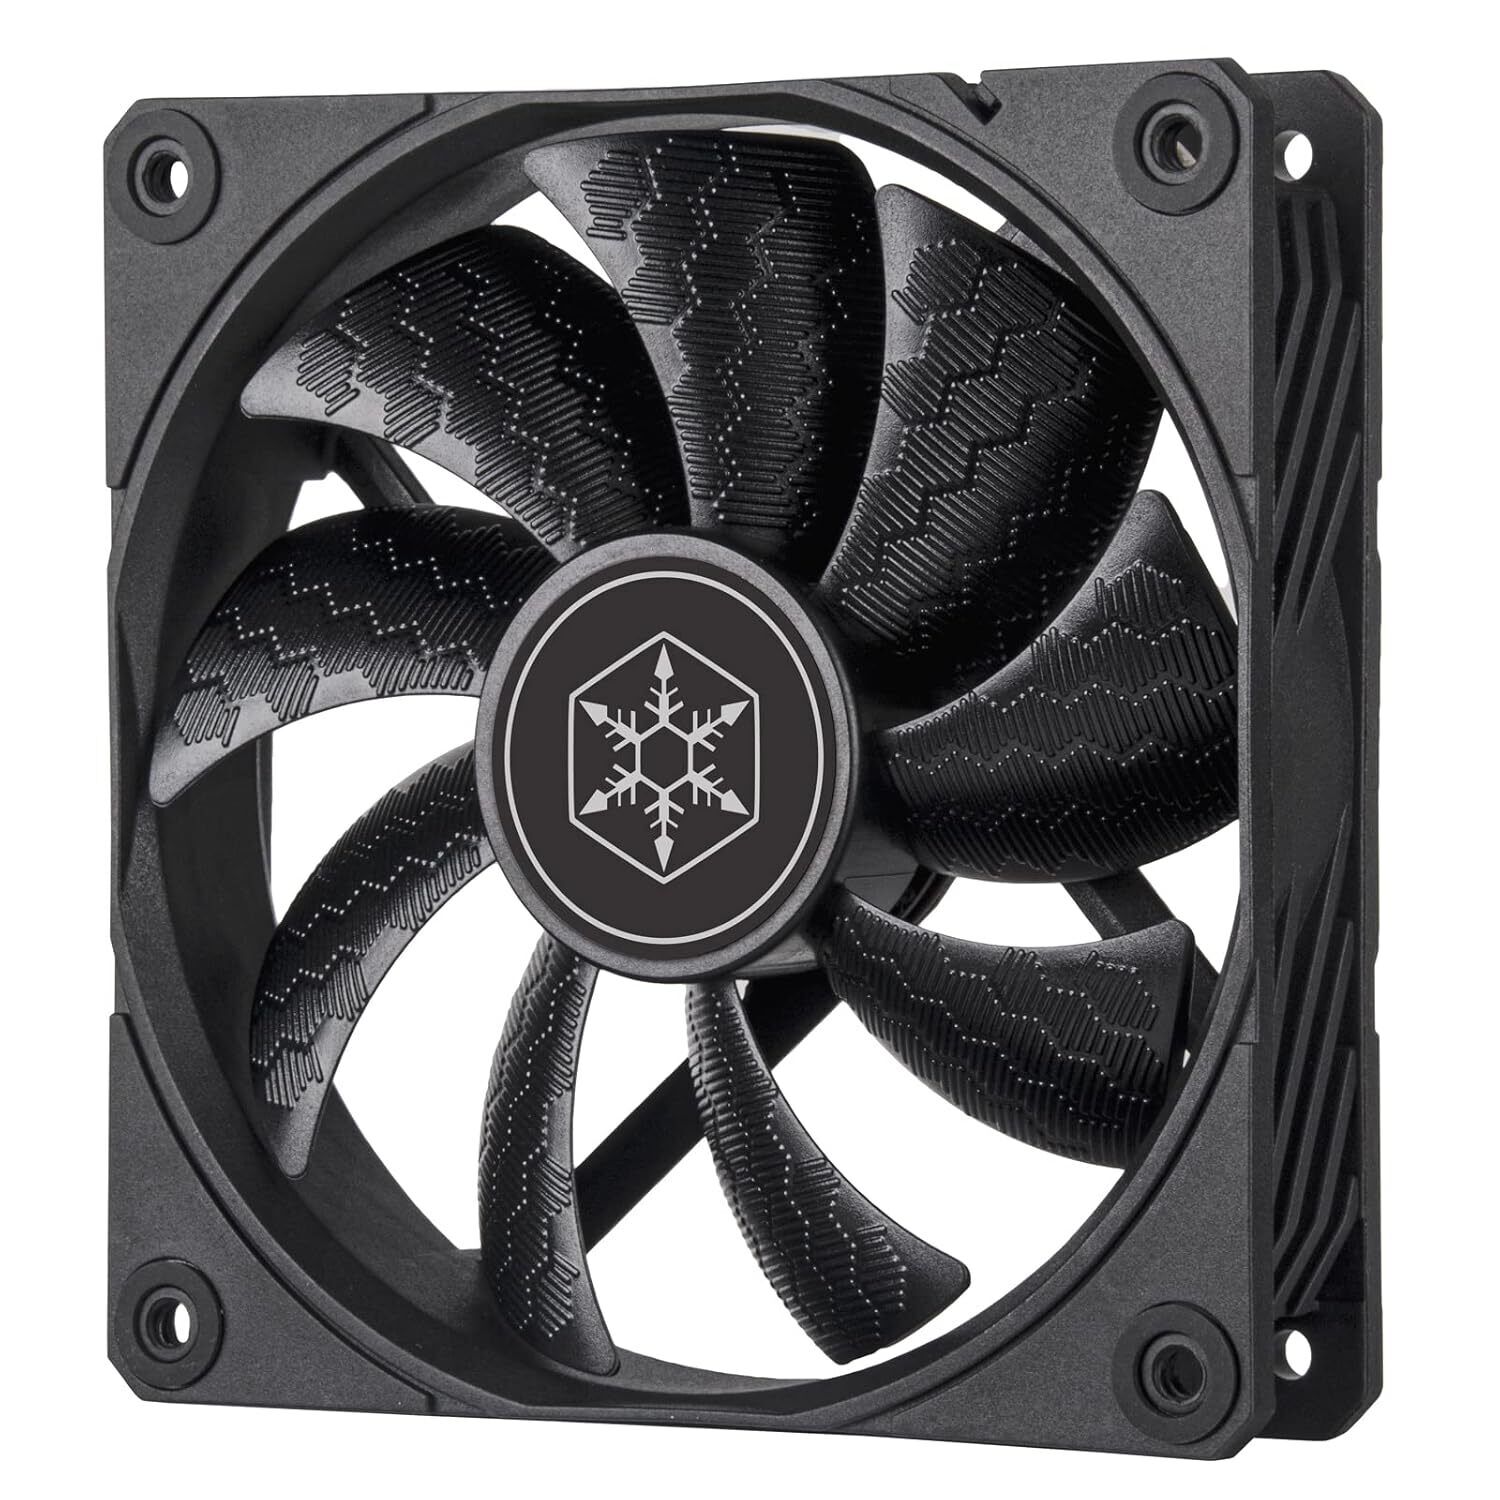 SilverStone Technology Shark Force 120 Performance Enhanced 120mm PWM Fan with